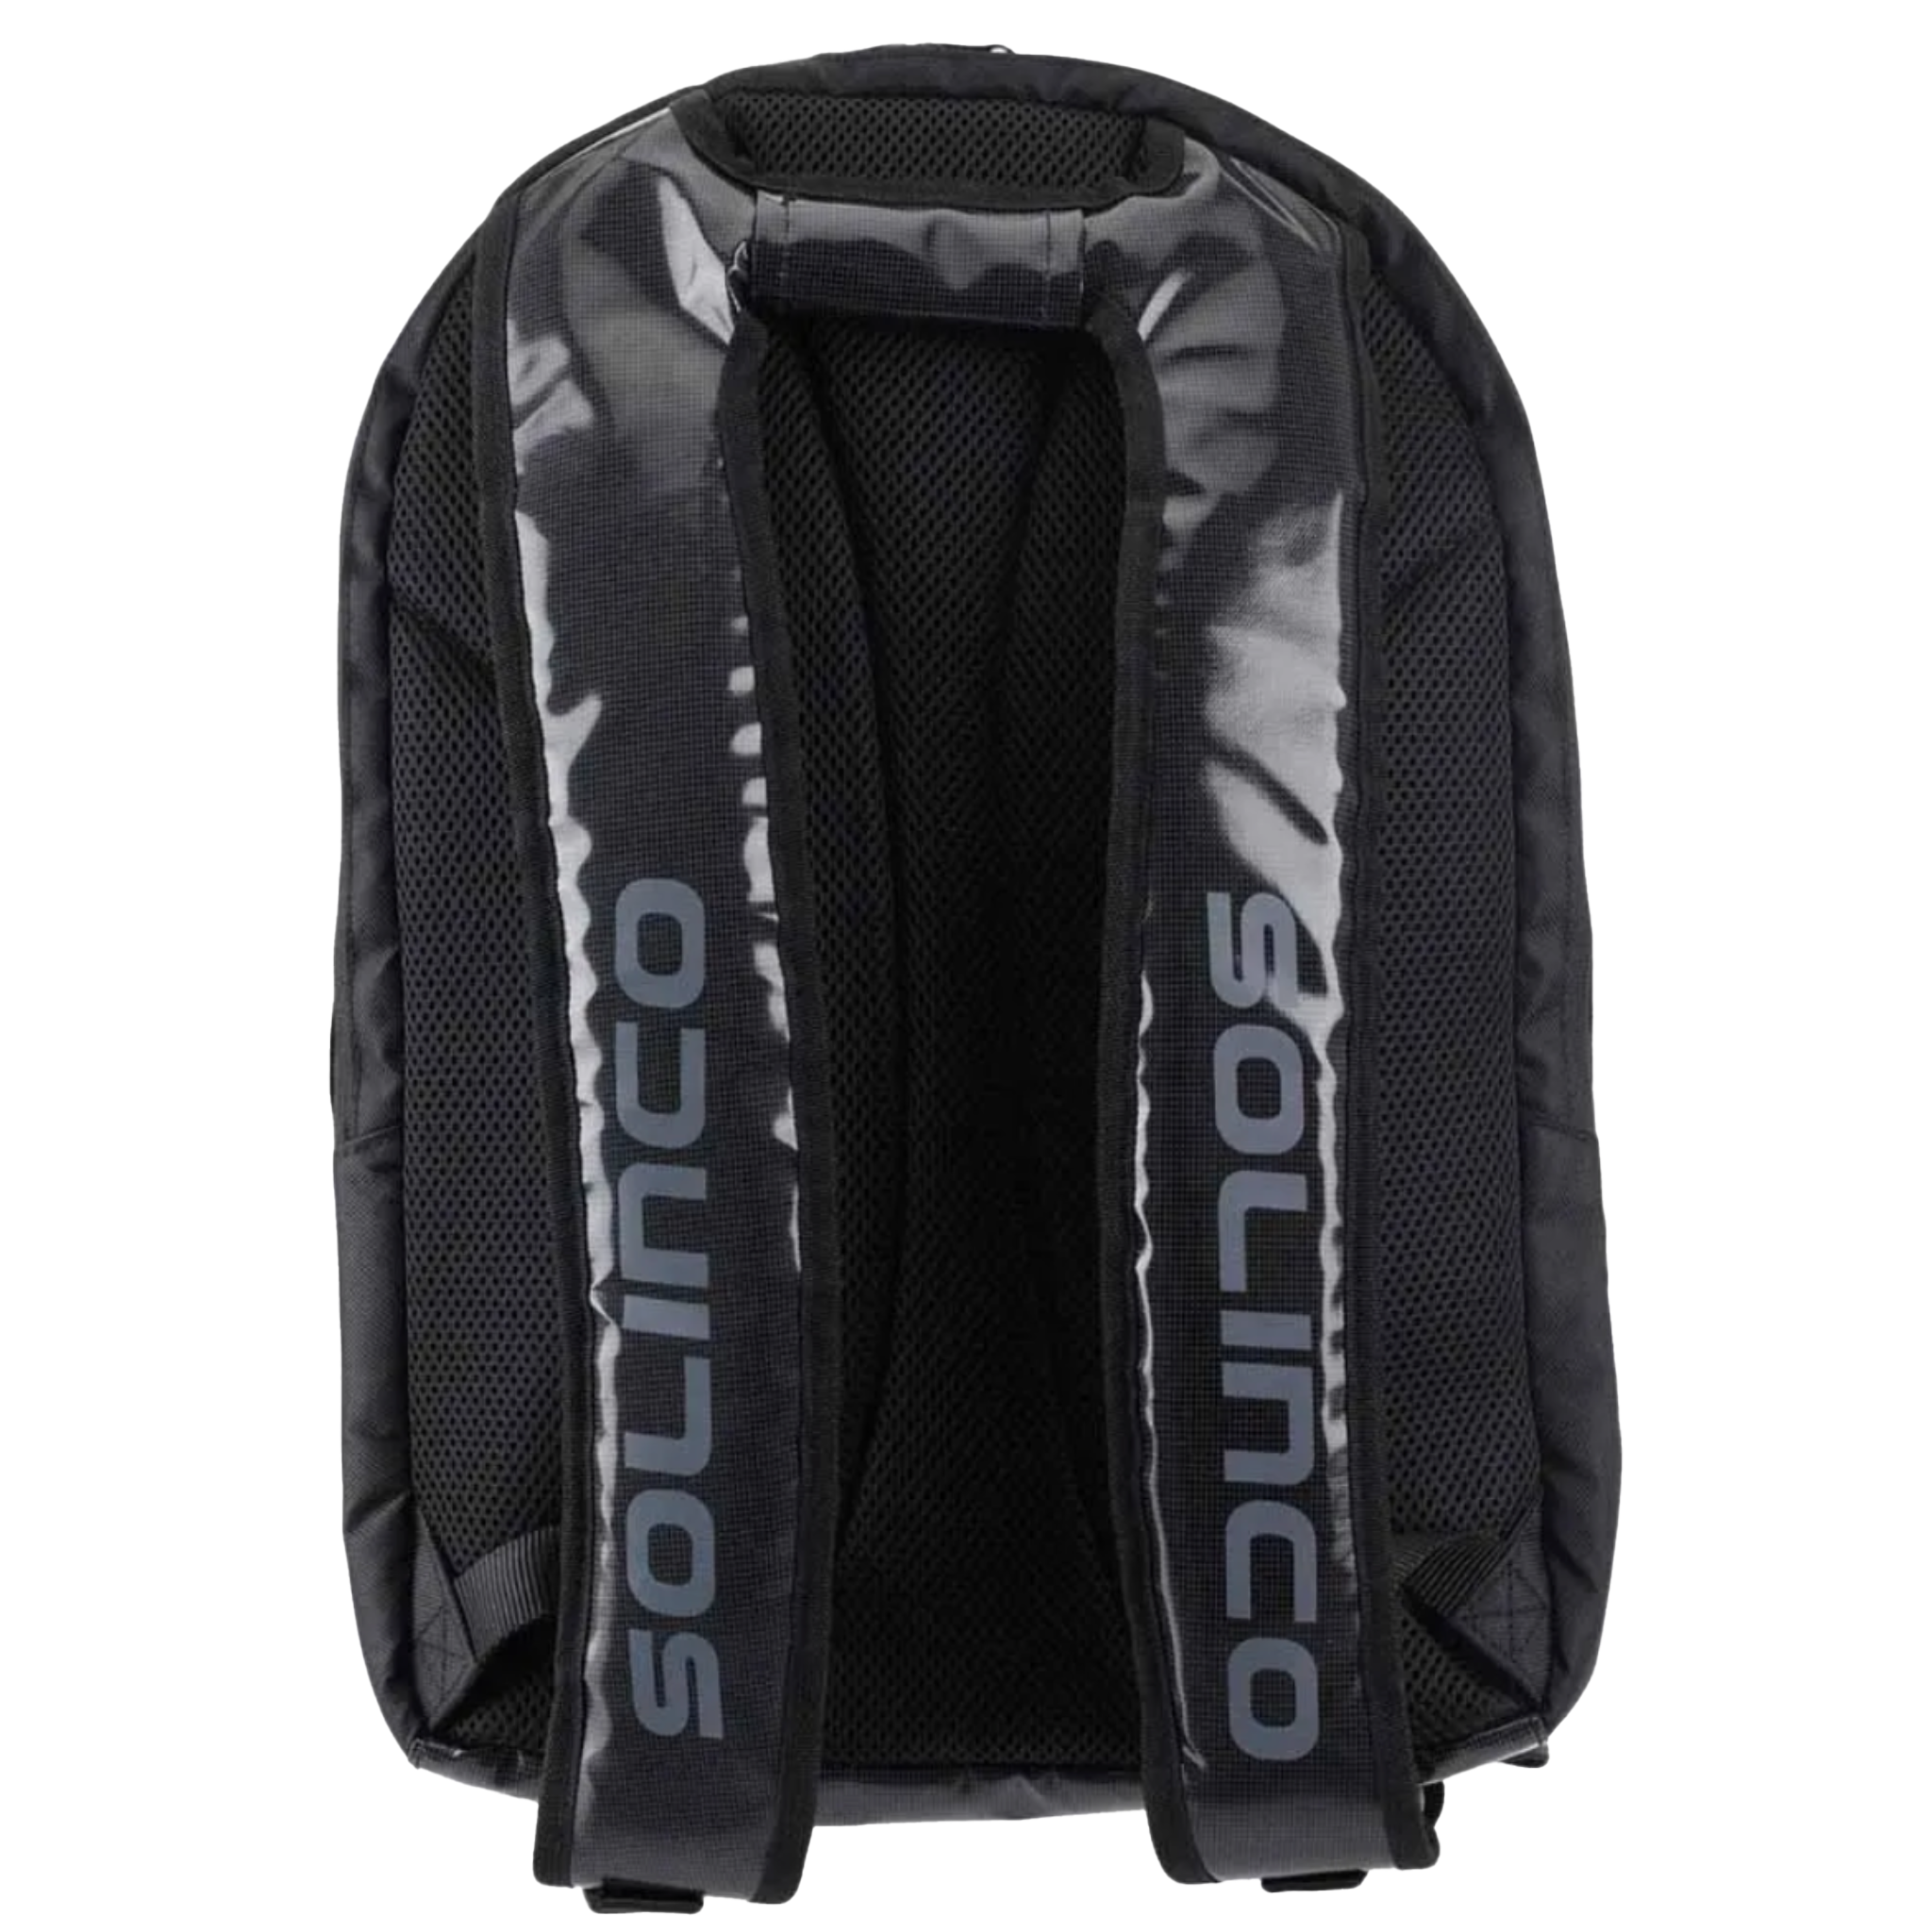 Solinco Tour Backpack > Blackout